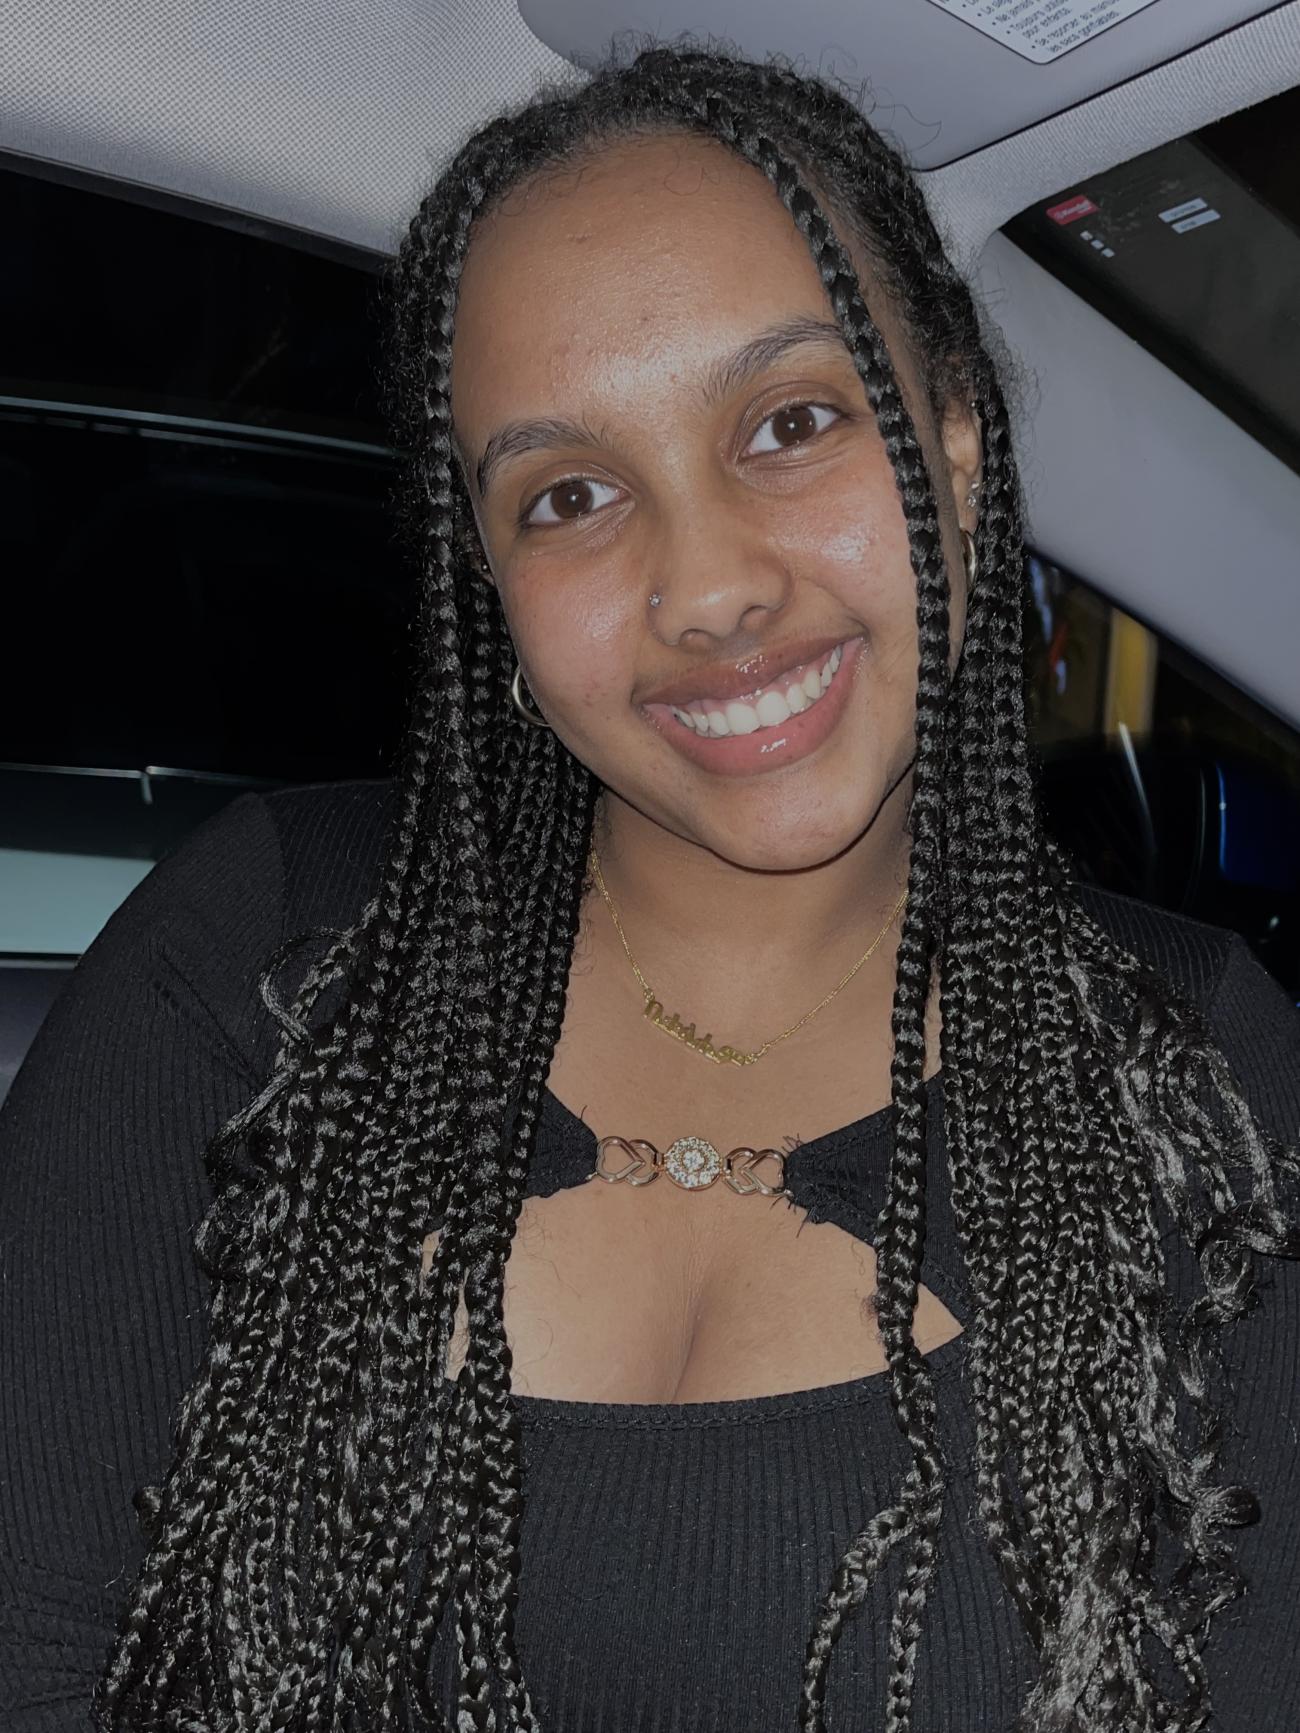 Portrait of Betty, smiling at the camera. Braids frame her face and she is wearing a black shirt